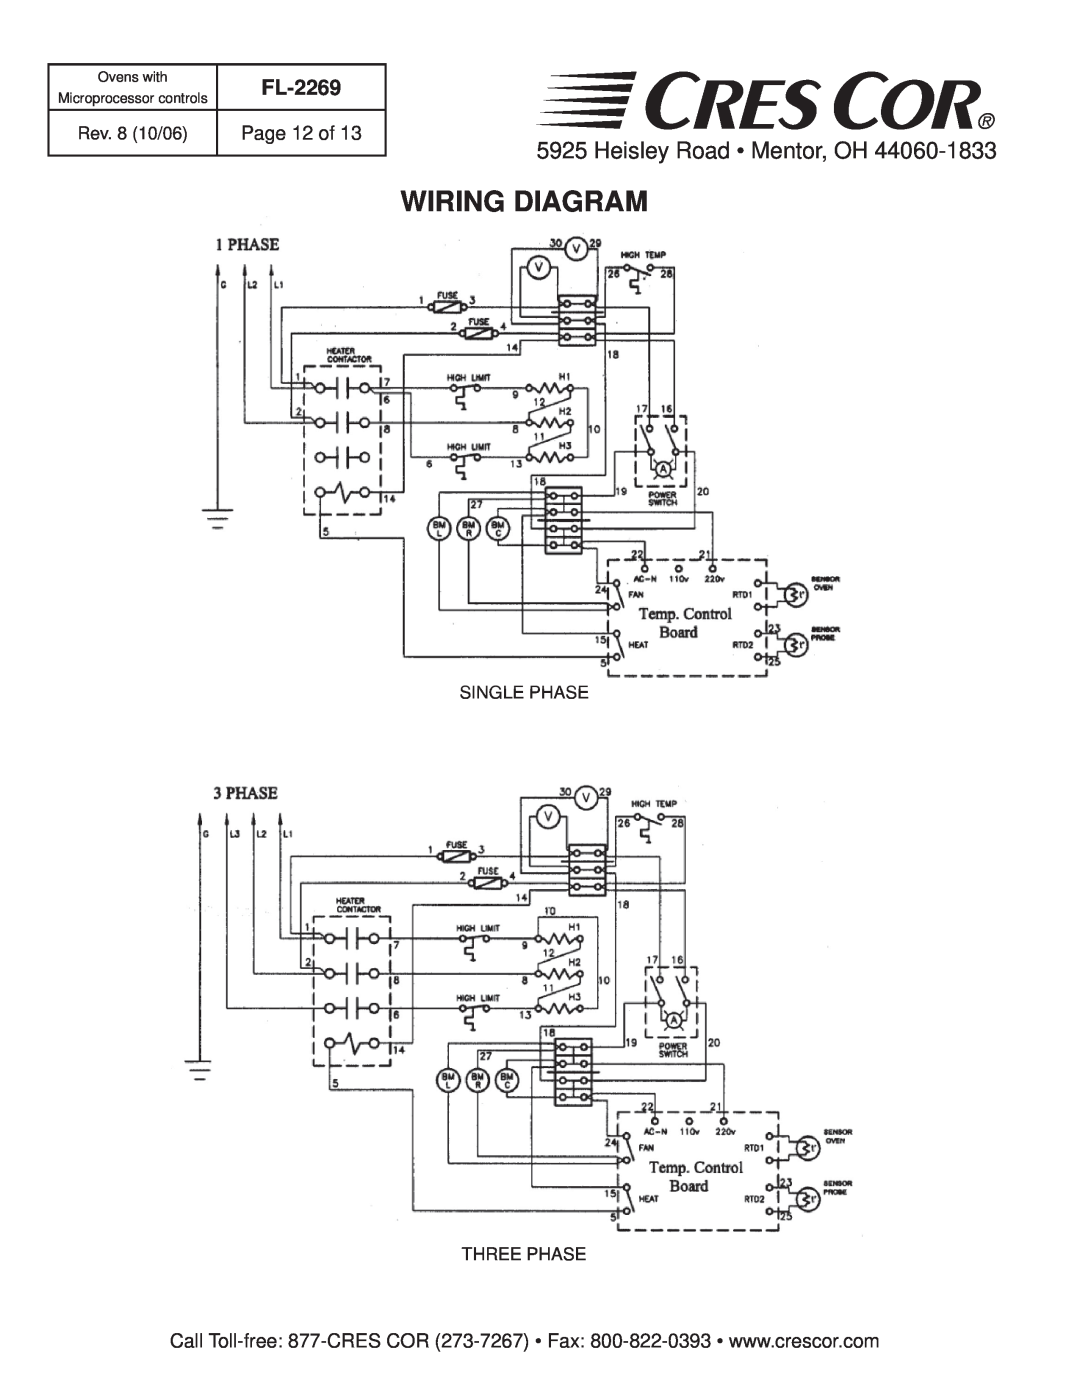 Cres Cor CO151H189B-Q1 Wiring Diagram, Page 12 of, Heisley Road Mentor, OH, FL-2269, Ovens with, Microprocessor controls 